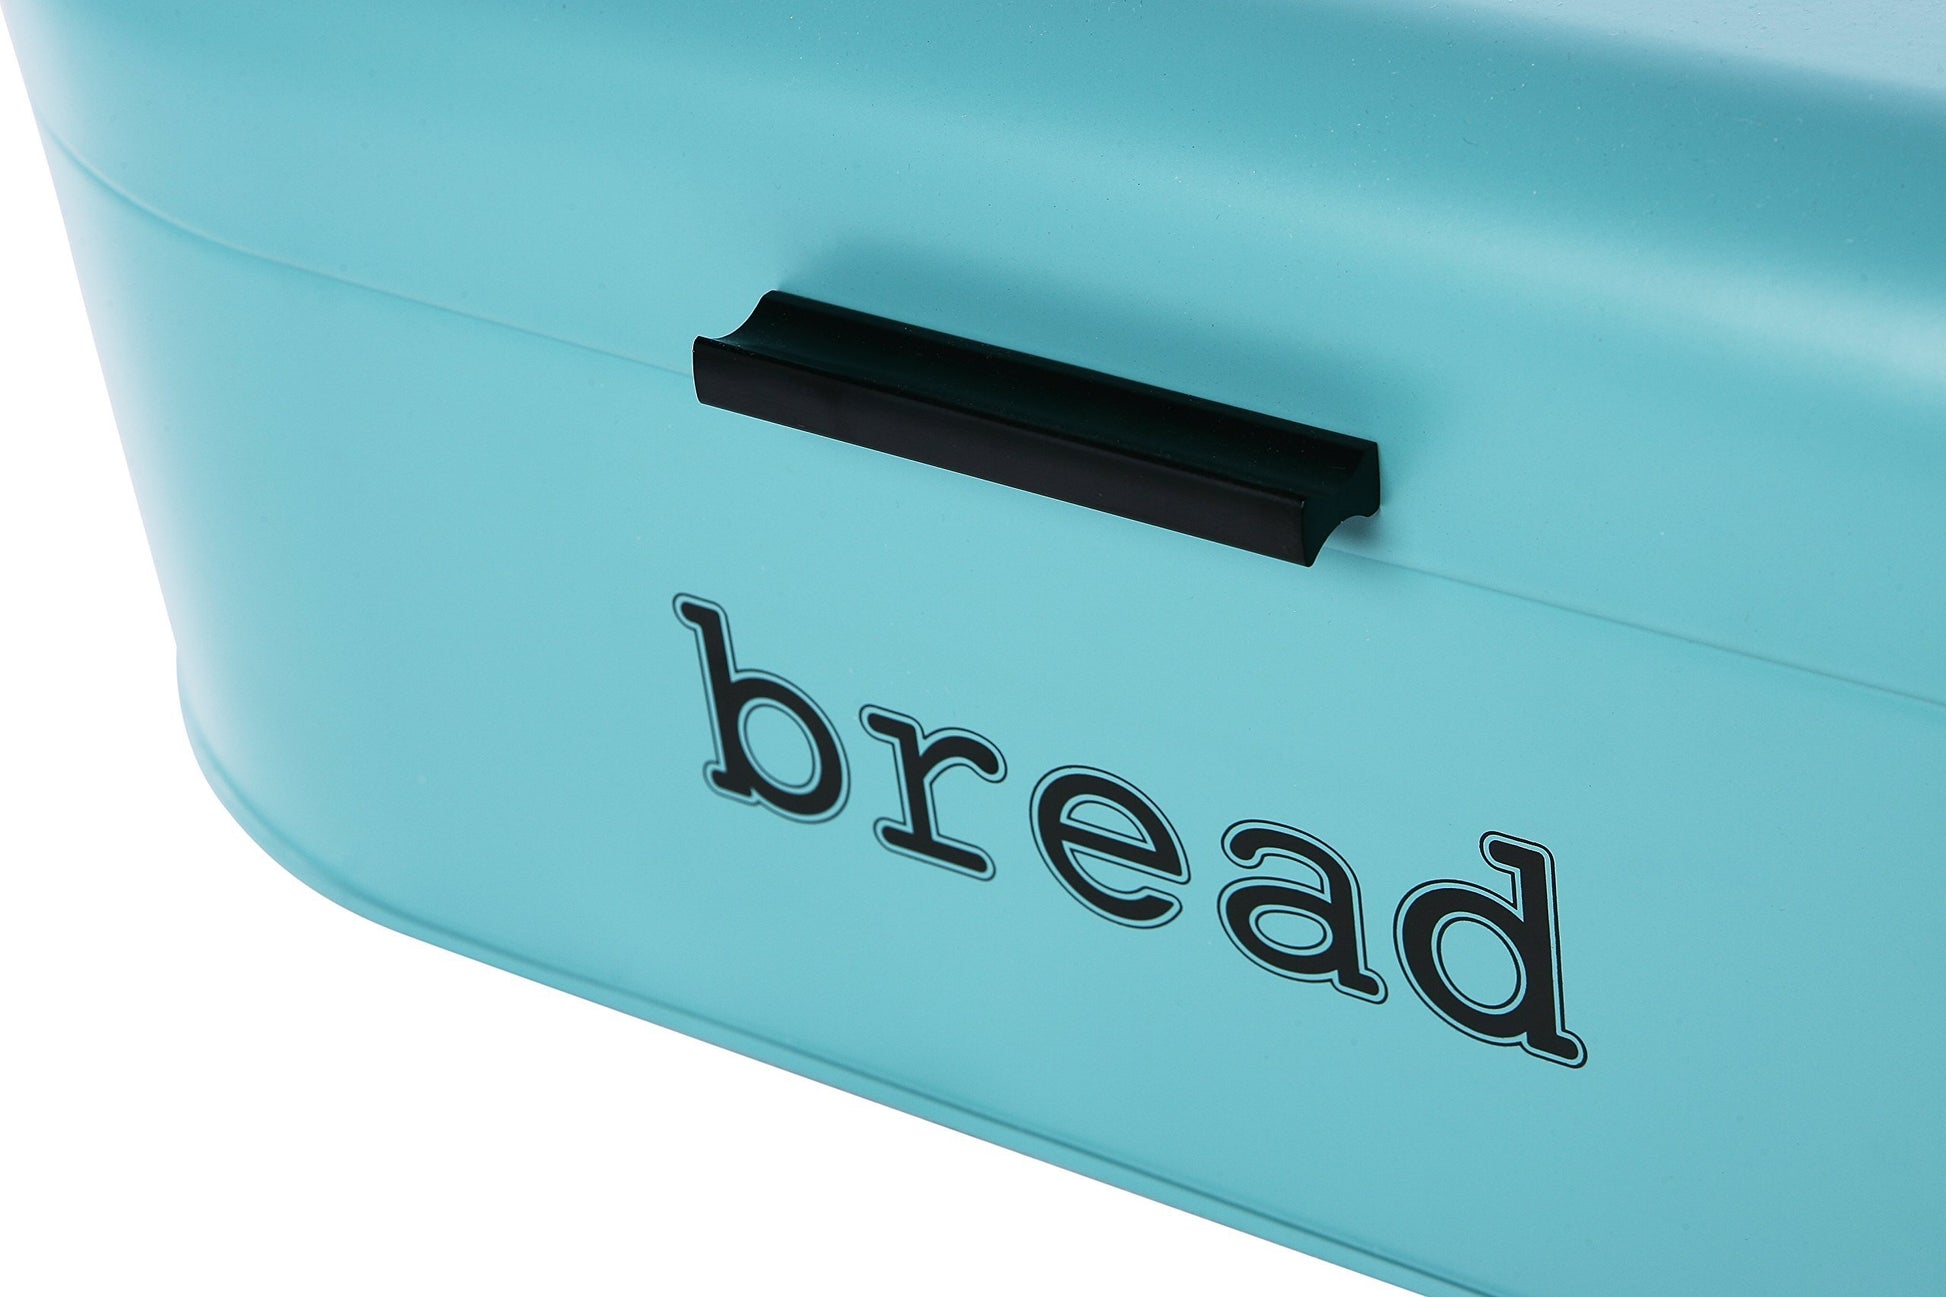 Online shopping large bread box for kitchen counter bread bin storage container with lid metal vintage retro design for loaves sliced bread pastries teal 17 x 9 x 6 inches